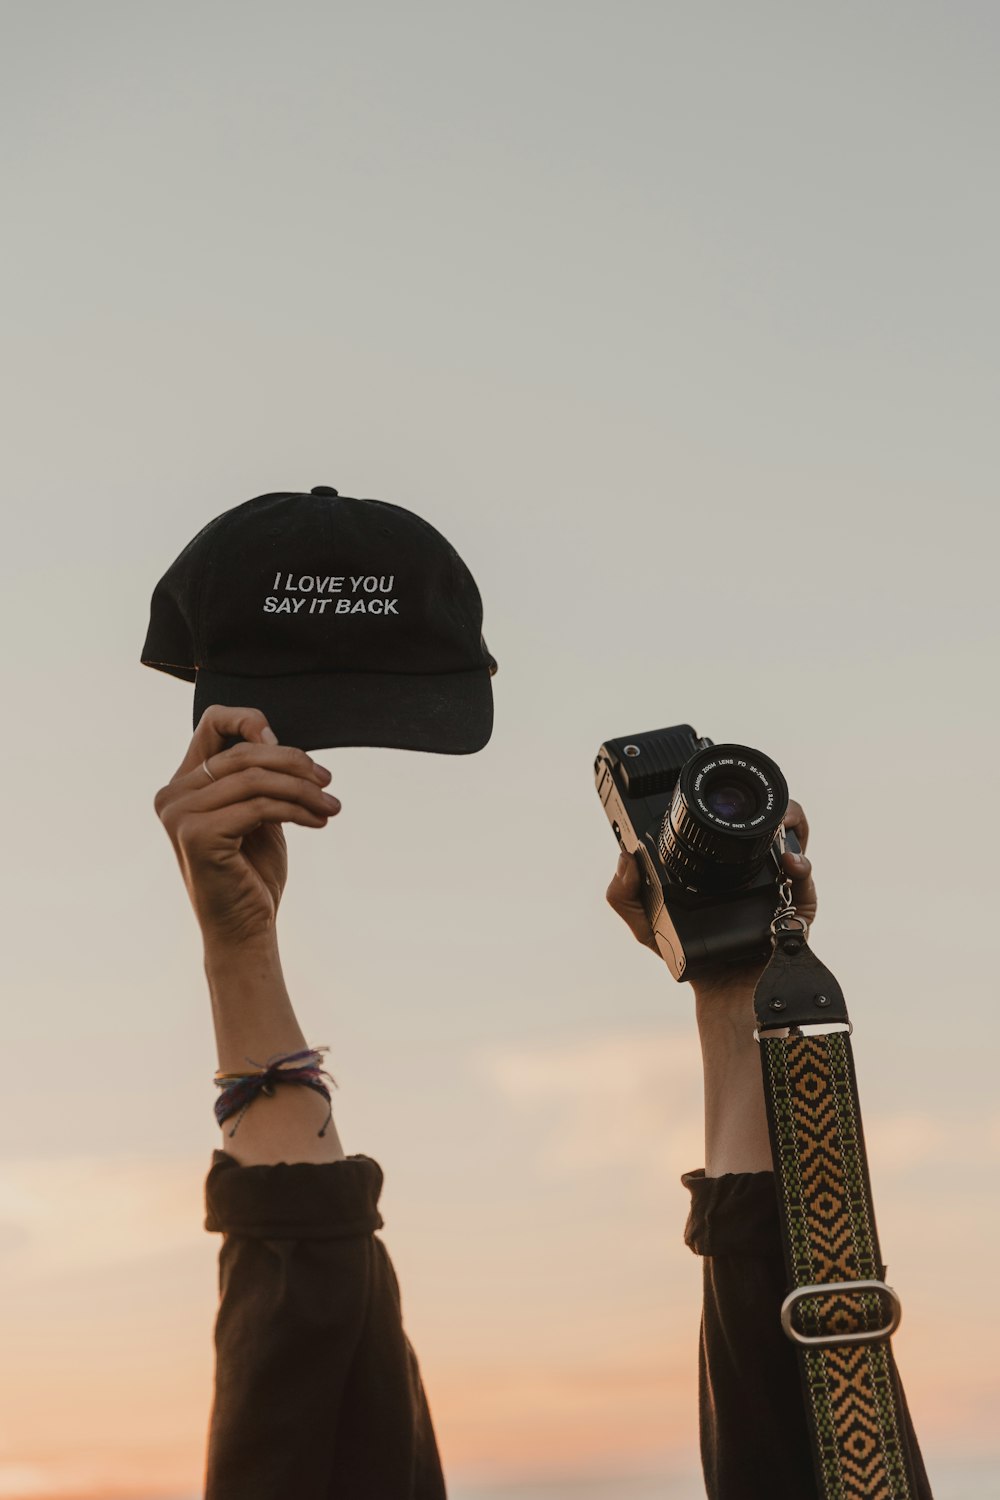 two people holding up a hat and a camera